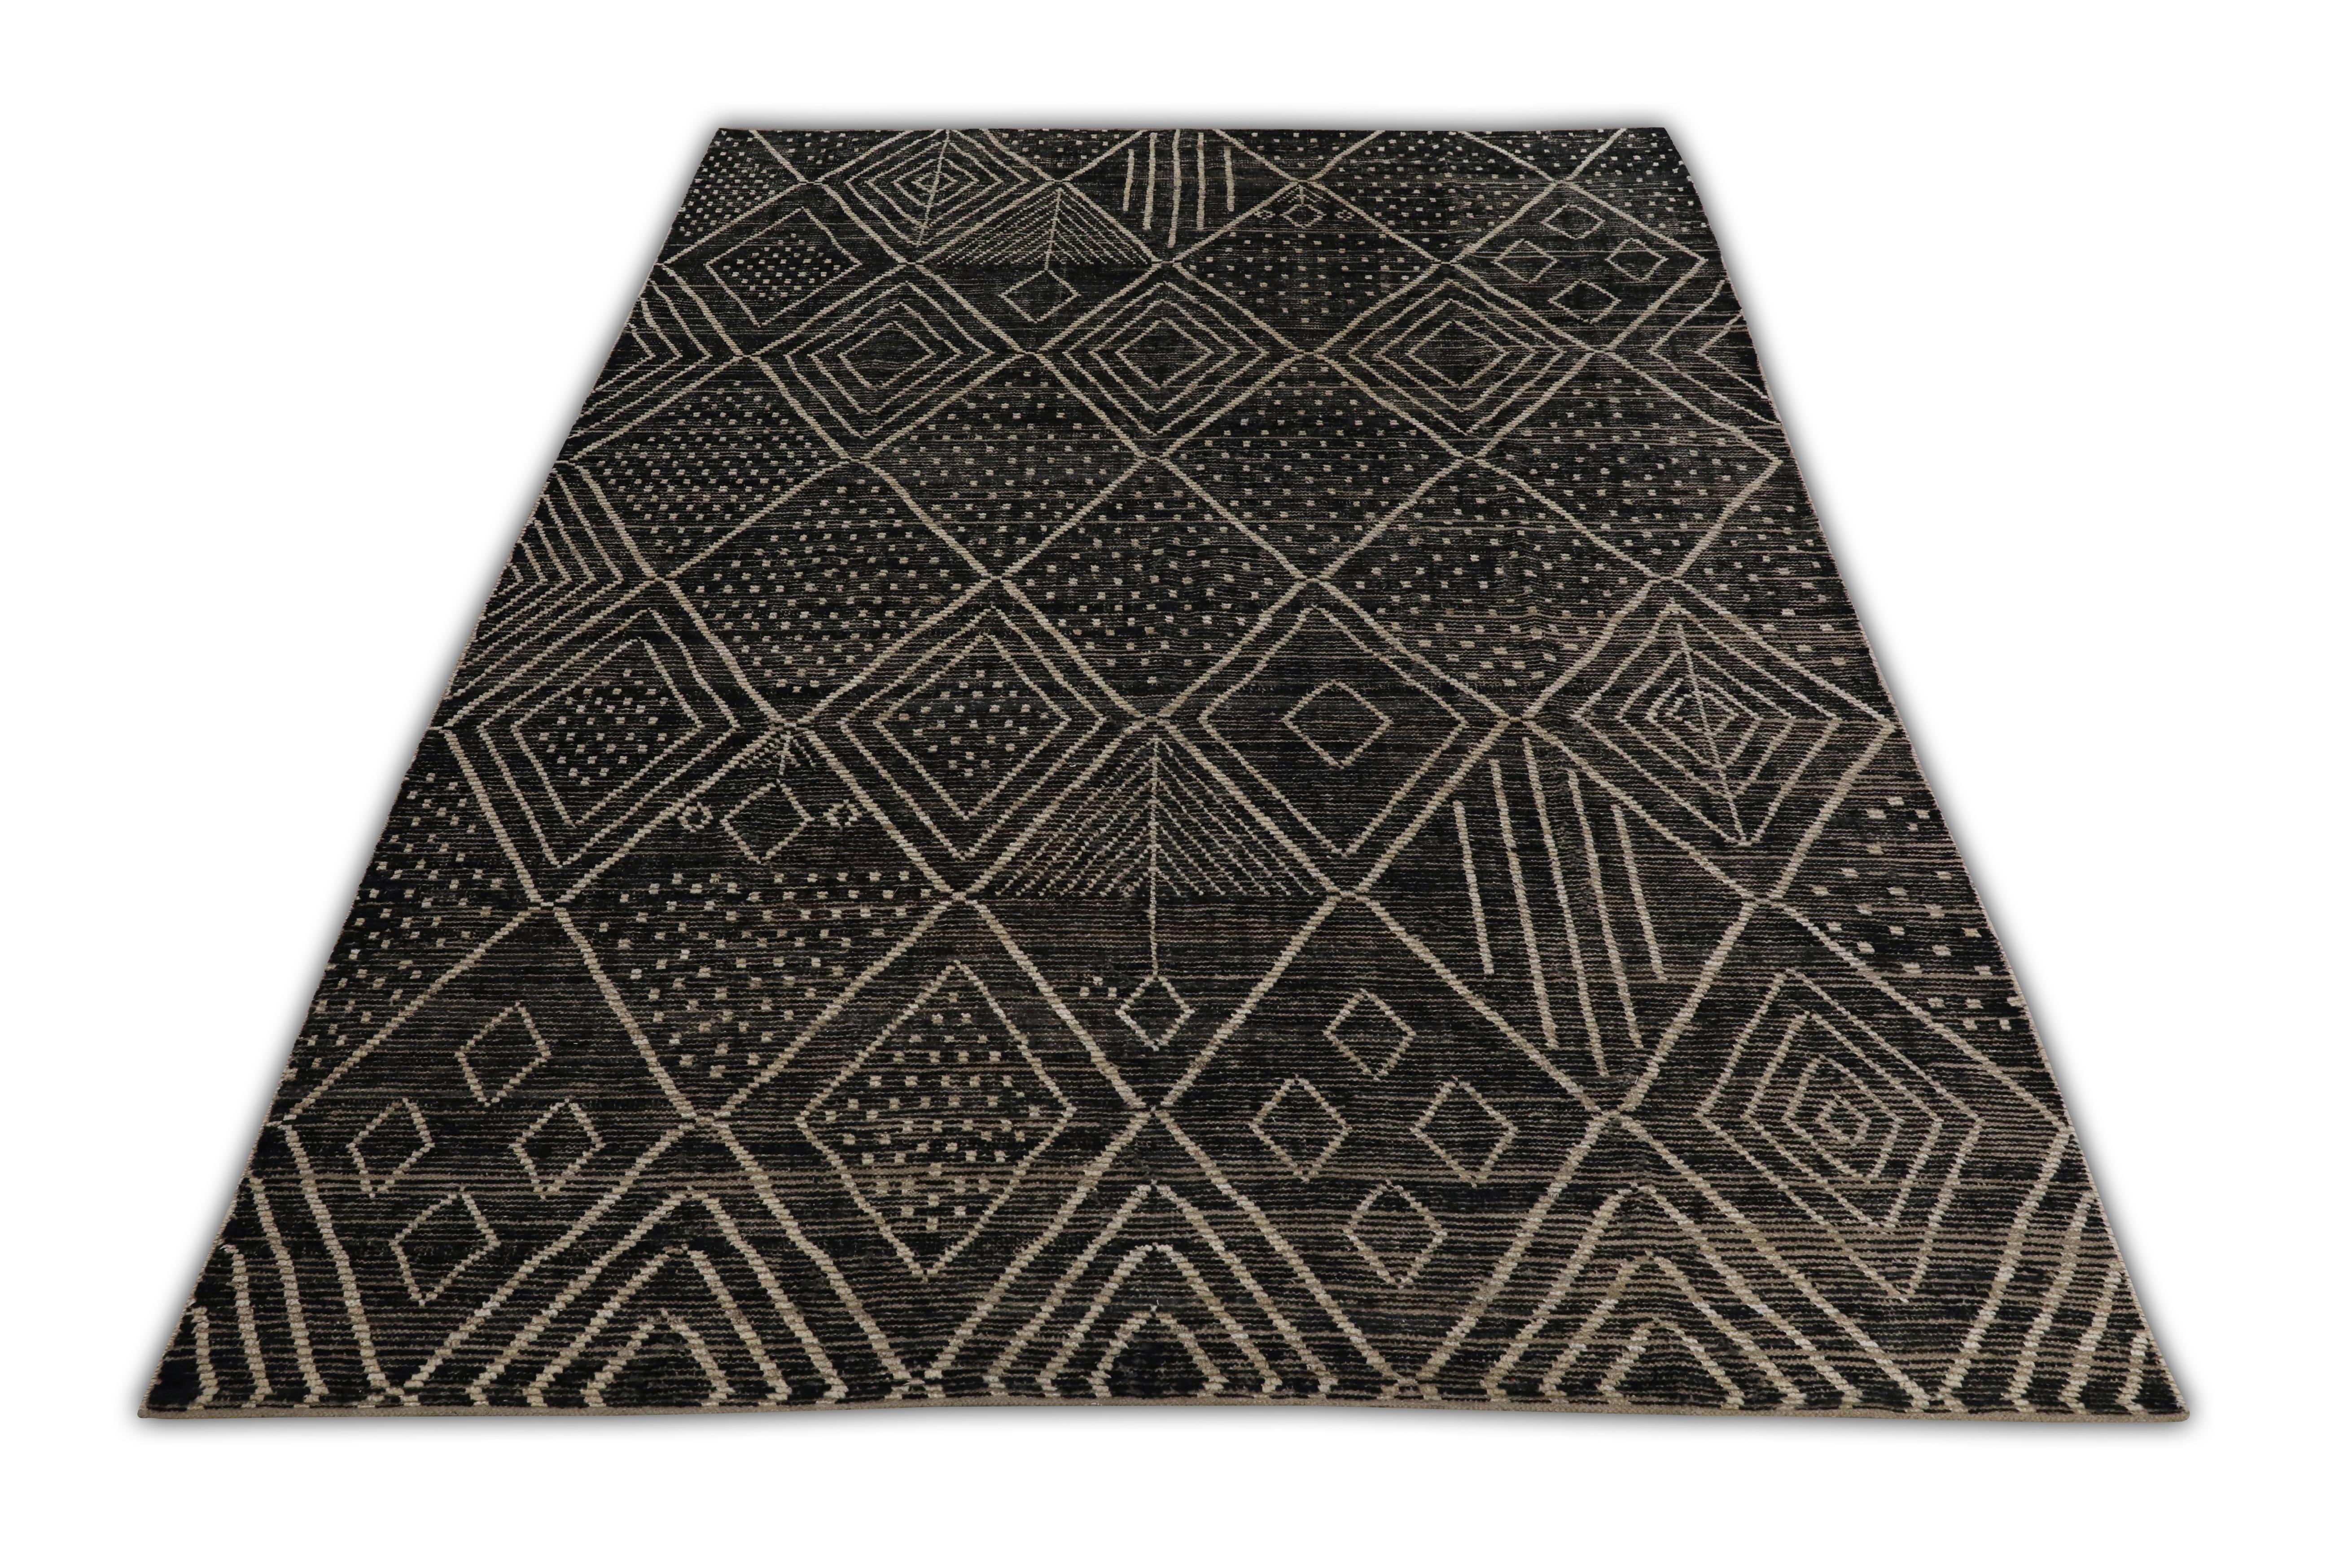 Introducing our exquisite handwoven wool modern Moroccan-style rug, a stunning blend of traditional craftsmanship and contemporary design. Measuring 10'1